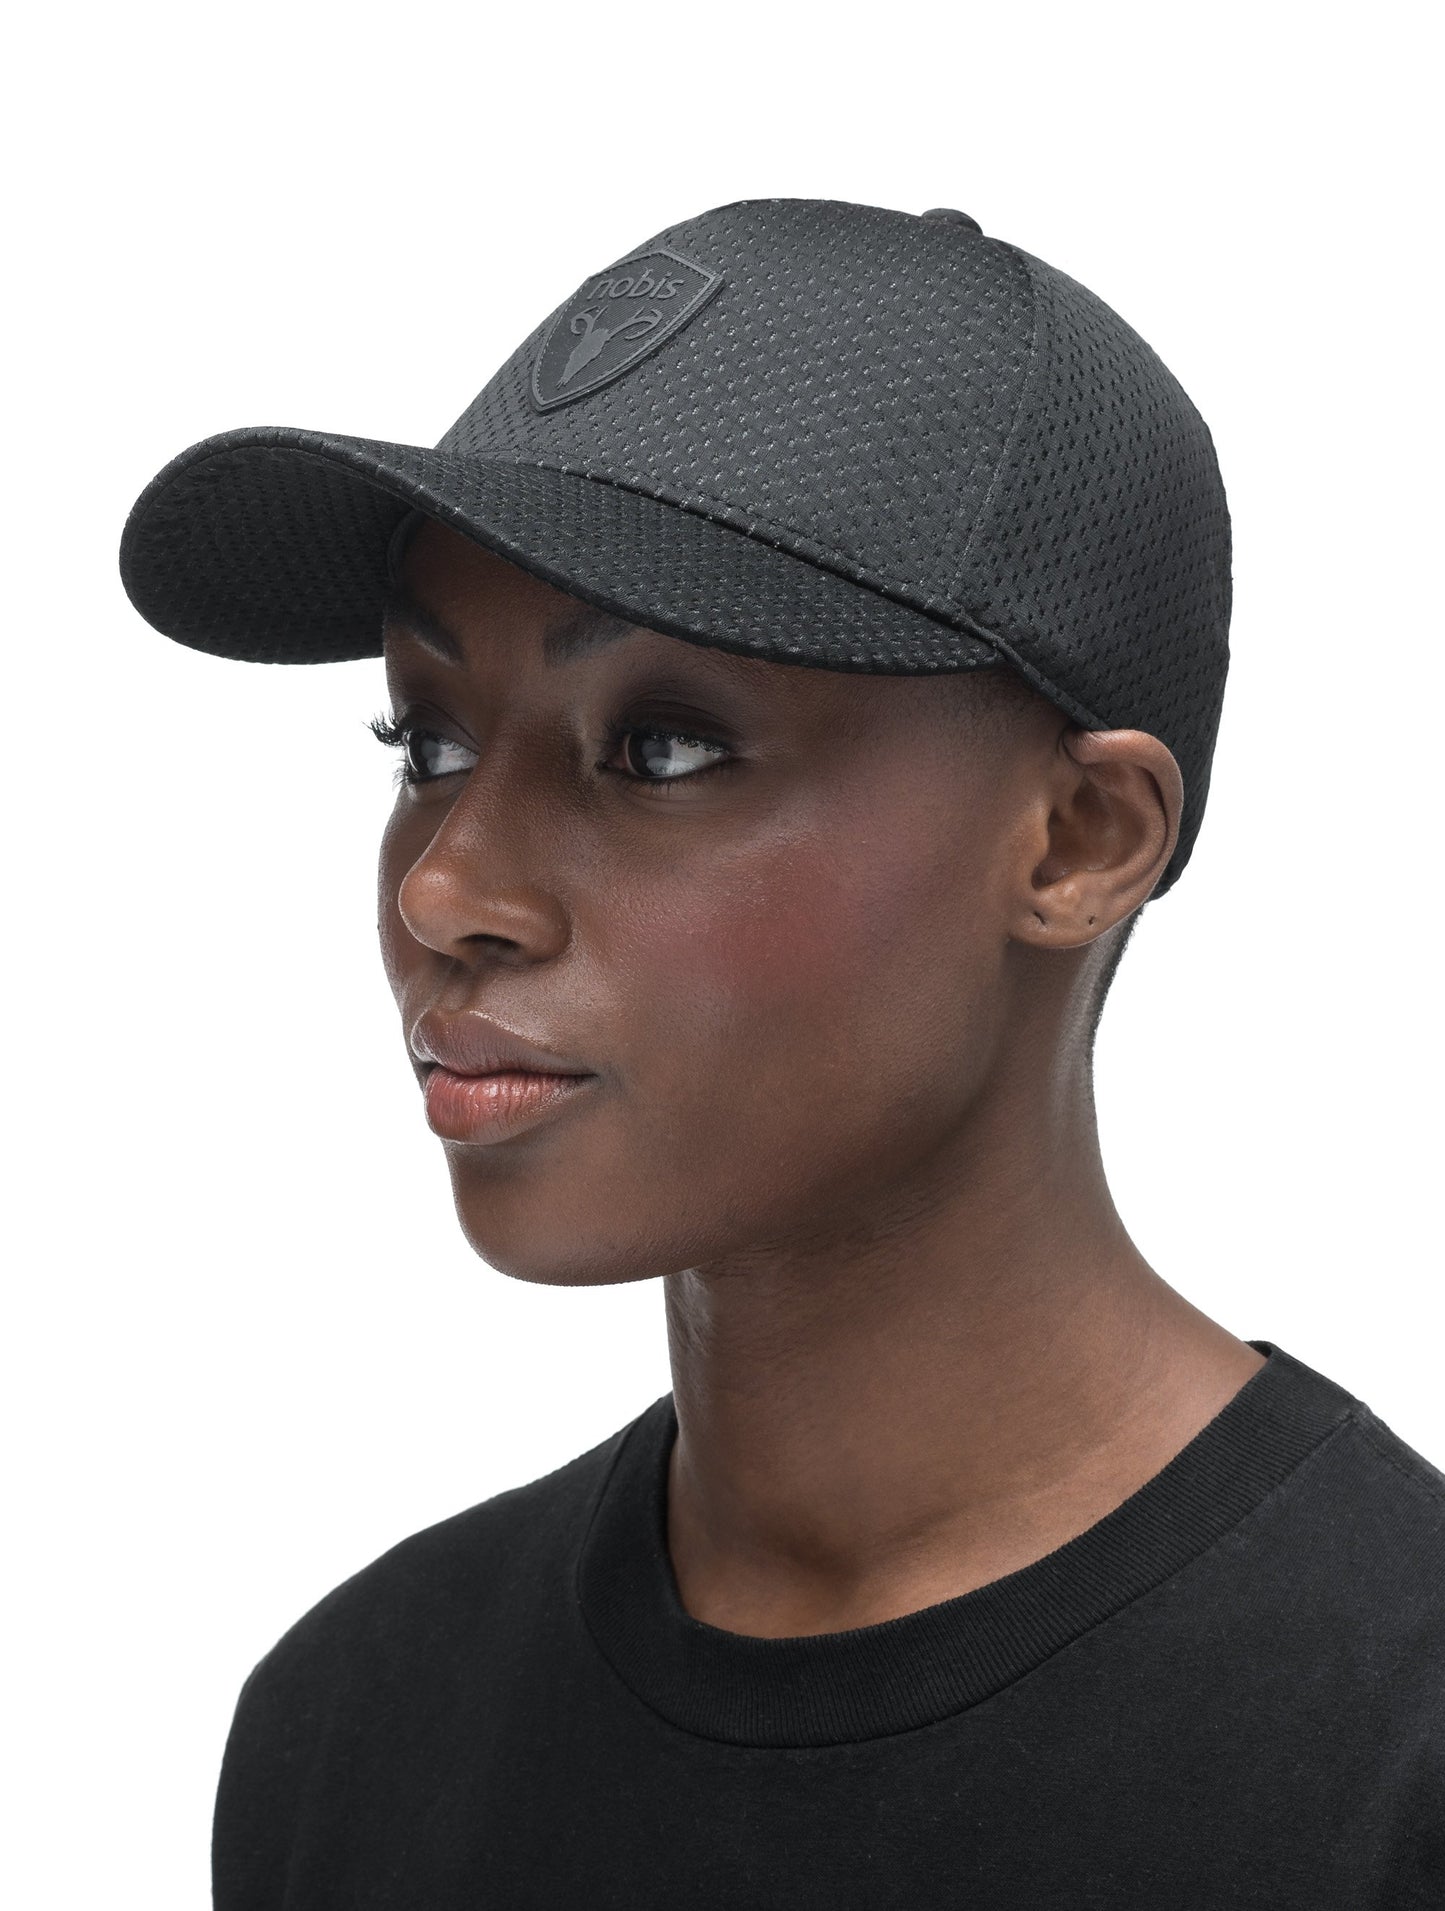 Unisex jersey 5-panel baseball hat with curved brim and adjustable strap at back in Black